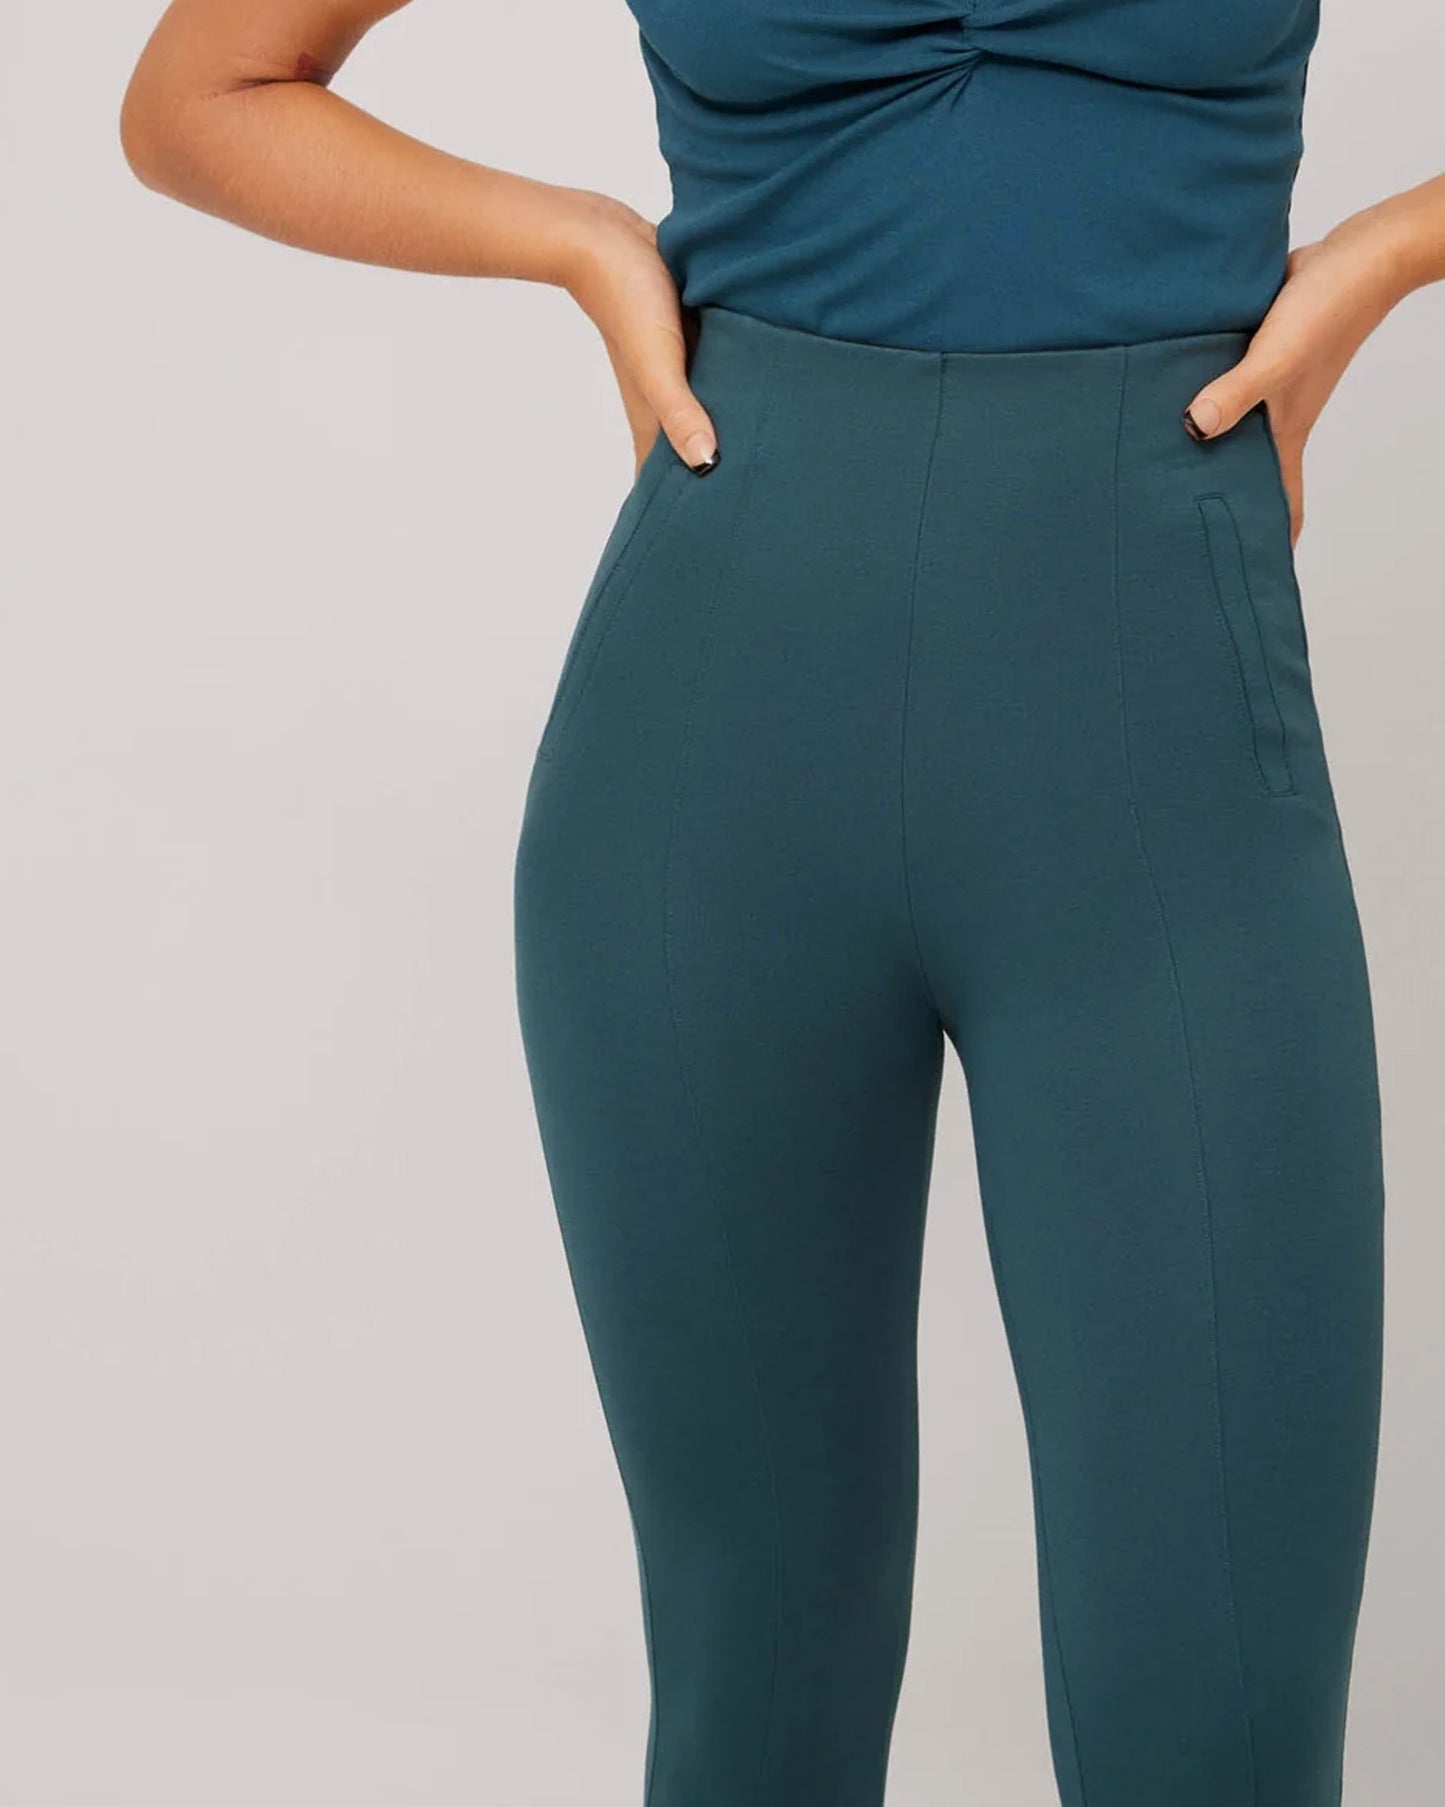 Ysabel Mora 70290 High Rise Treggings - Teal high waisted trouser leggings (treggings) with shaped darted waist, faux side pockets and centre seams down the front of the leg.